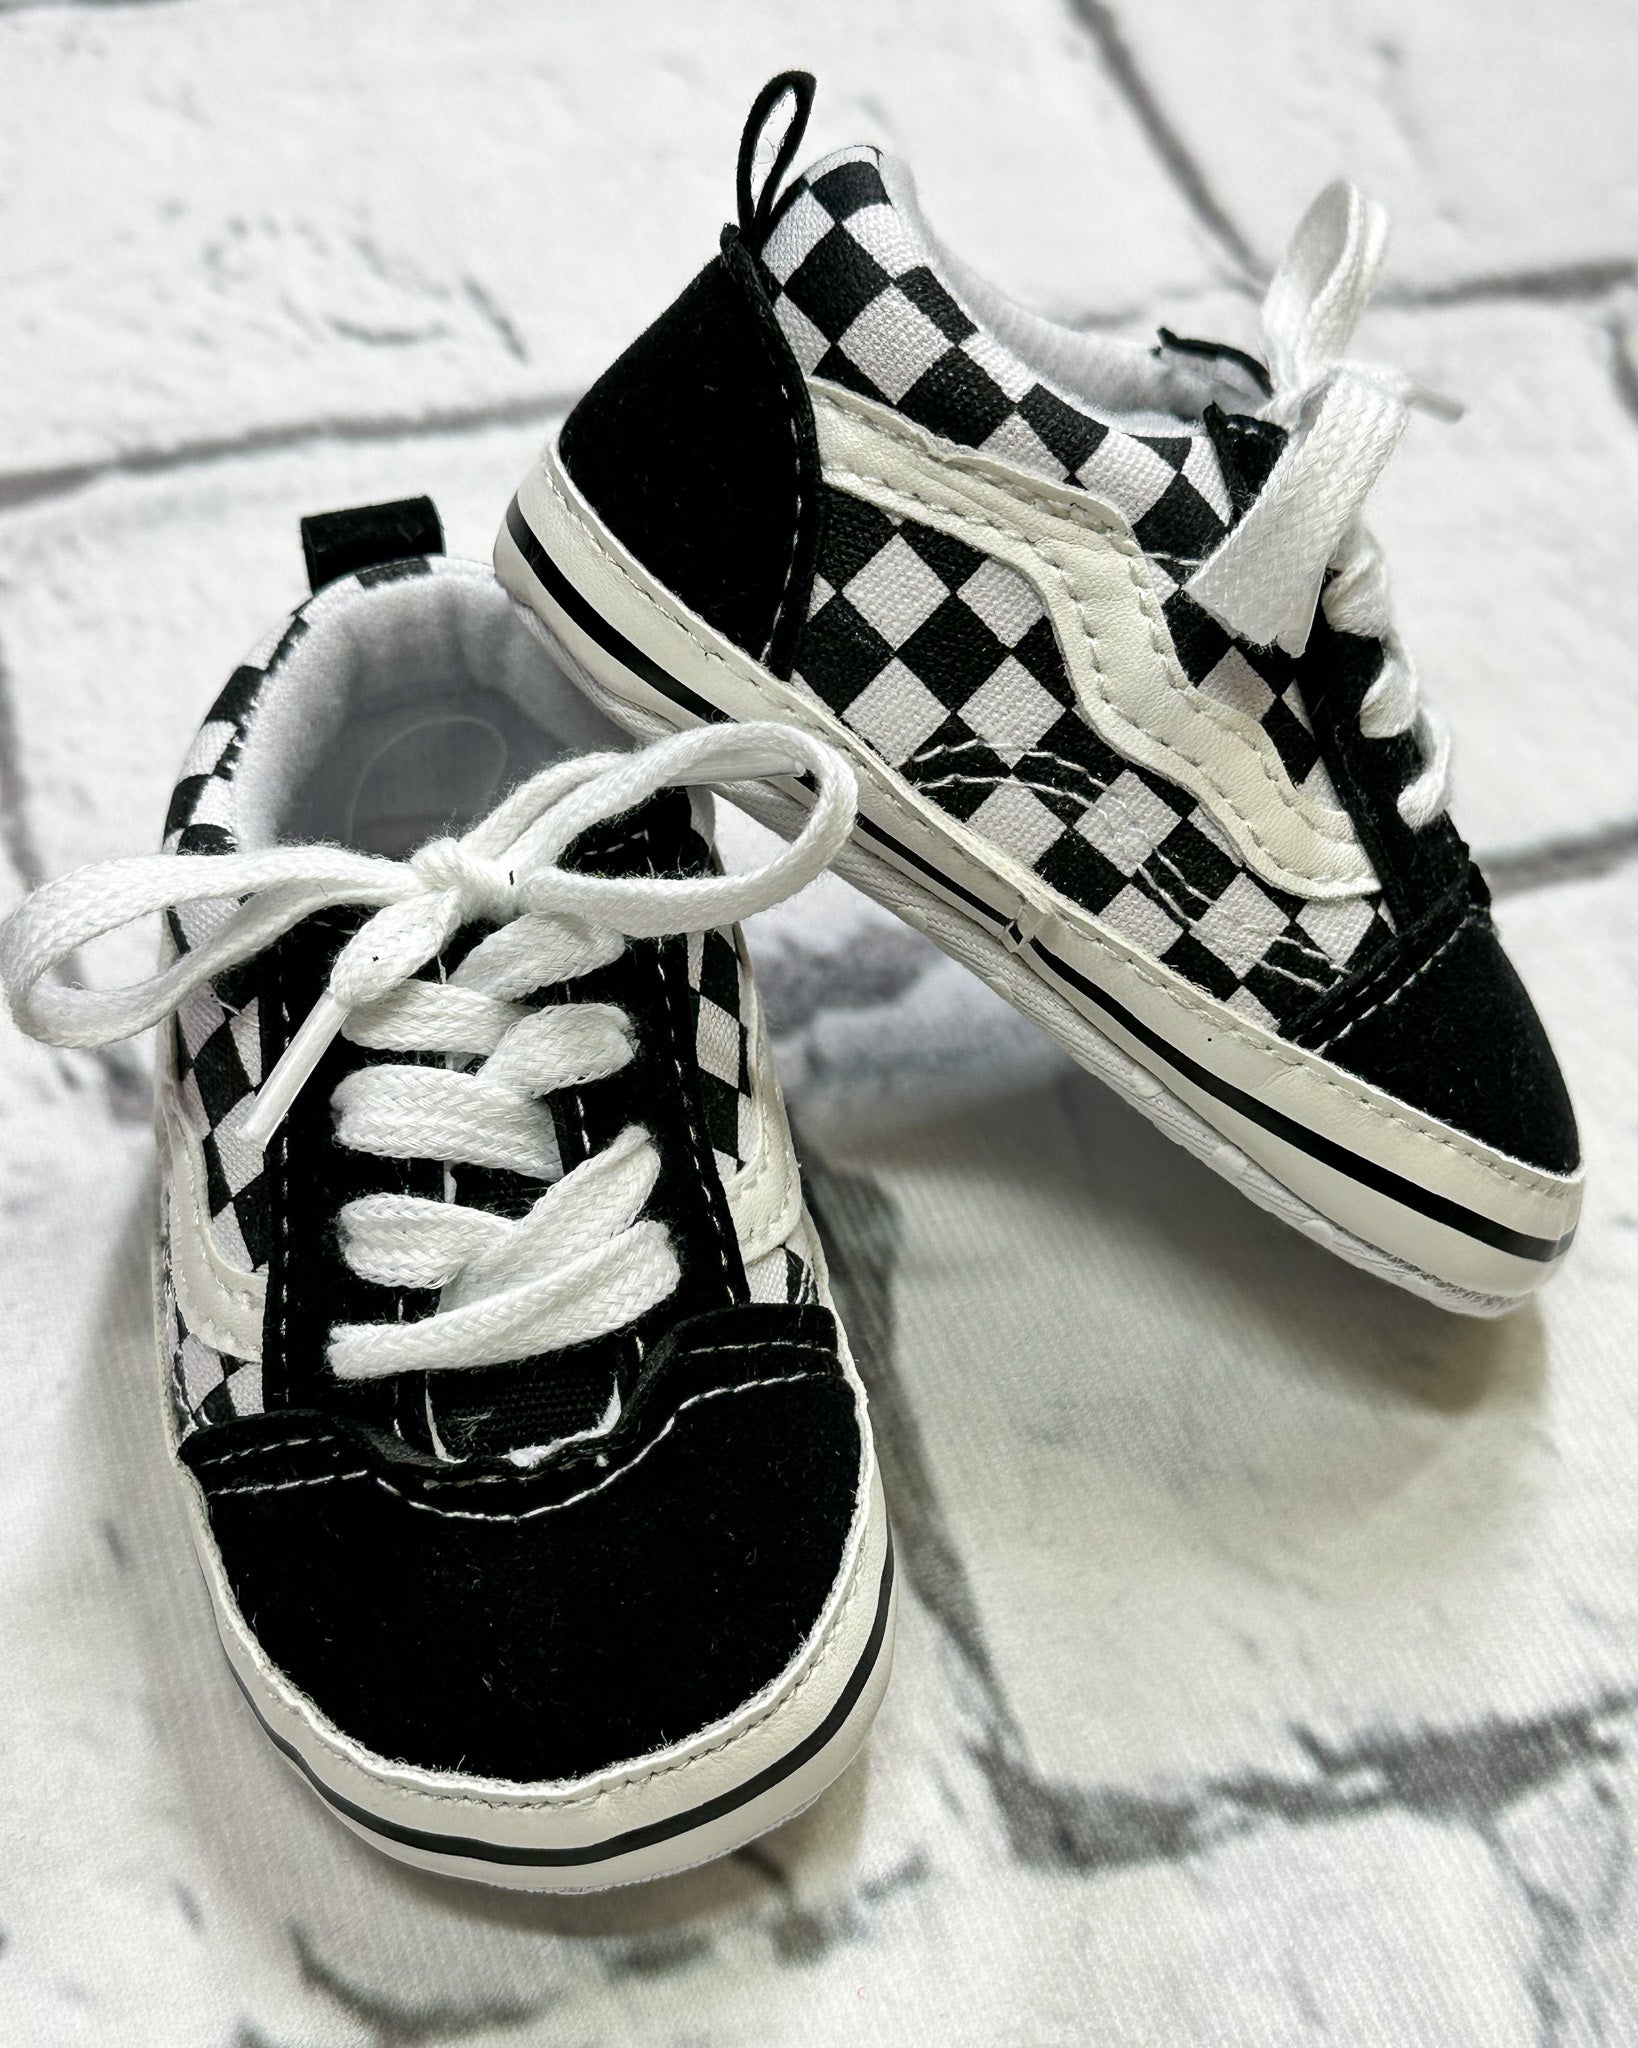 Shane Checkered Sneakers